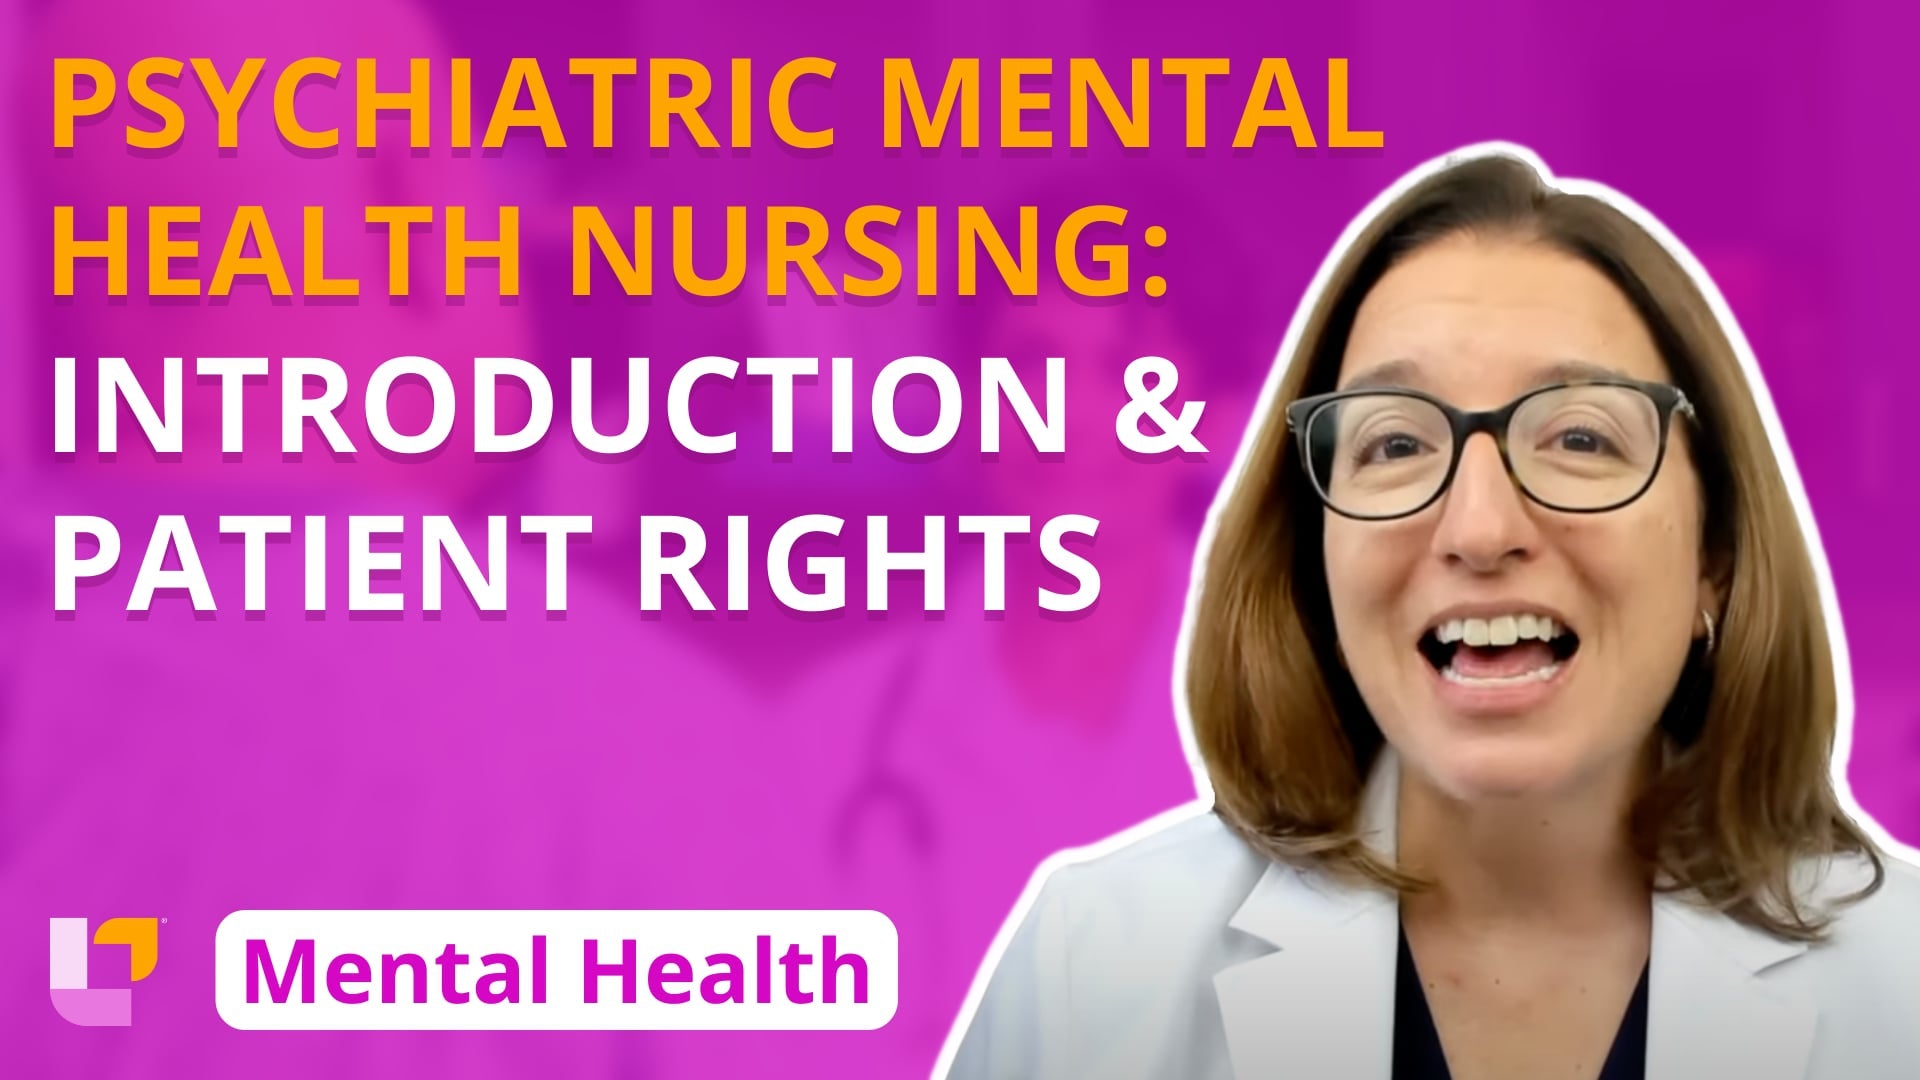 Psychiatric Mental Health, part 1: Introduction, Patient Rights - LevelUpRN